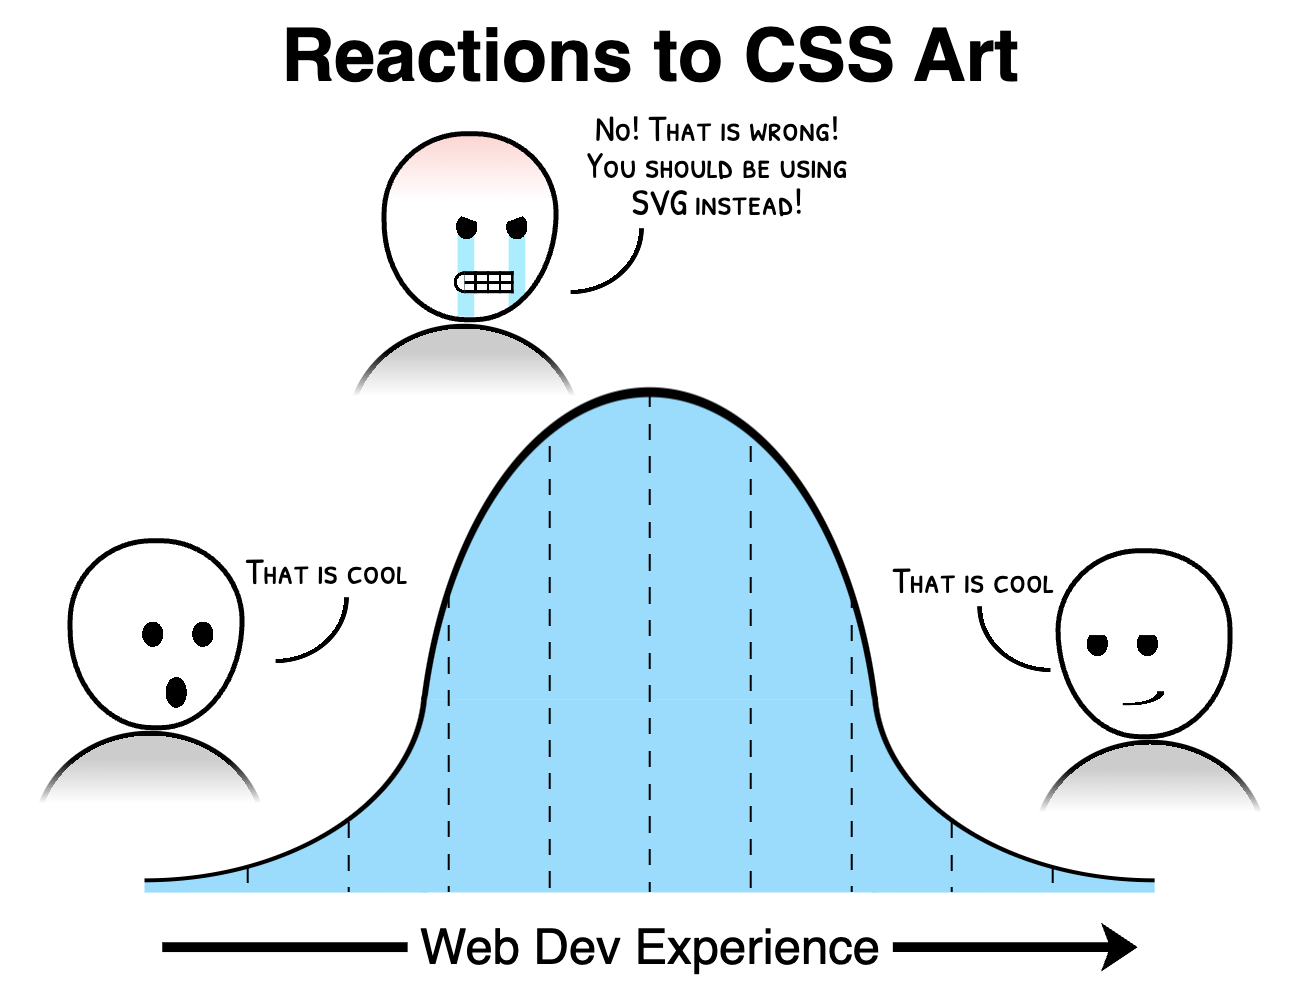 Cartoon with a bell chart titled 'Reactions to CSS Art'. At the bottom left, a figure of a surprised junior developer says 'That is cool'. At the top center, a mid-level developer cries 'No! That is wrong! You should be using SVG instead!'. At the bottom right, a senior developer grins and says 'That is cool'